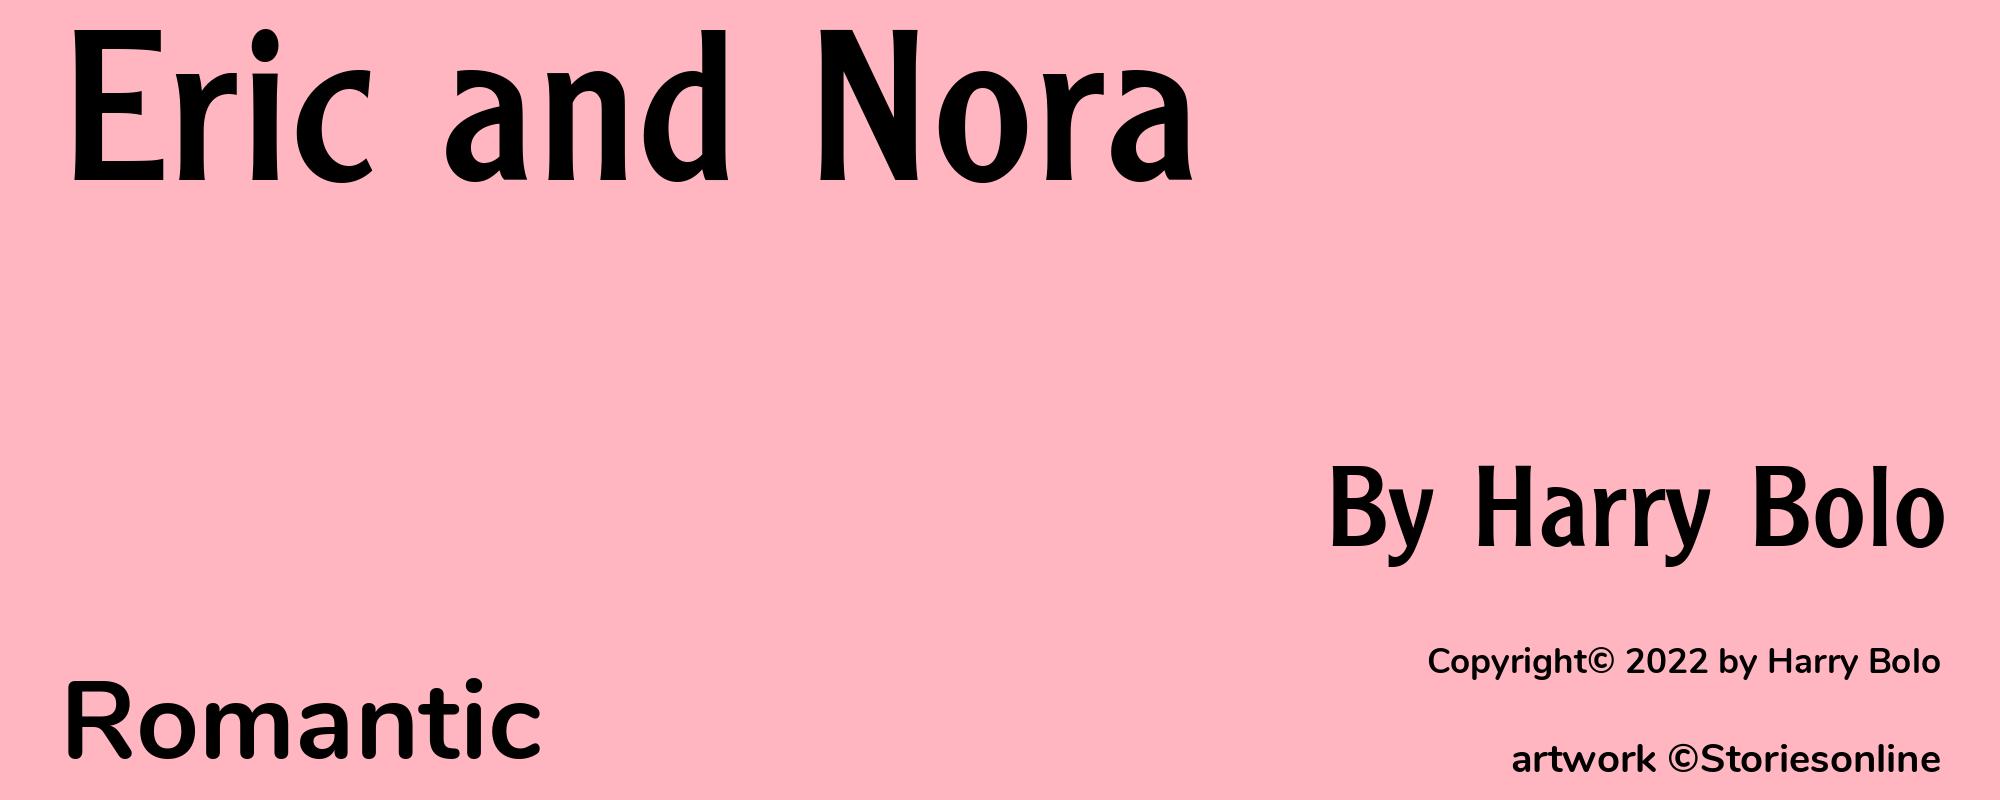 Eric and Nora - Cover